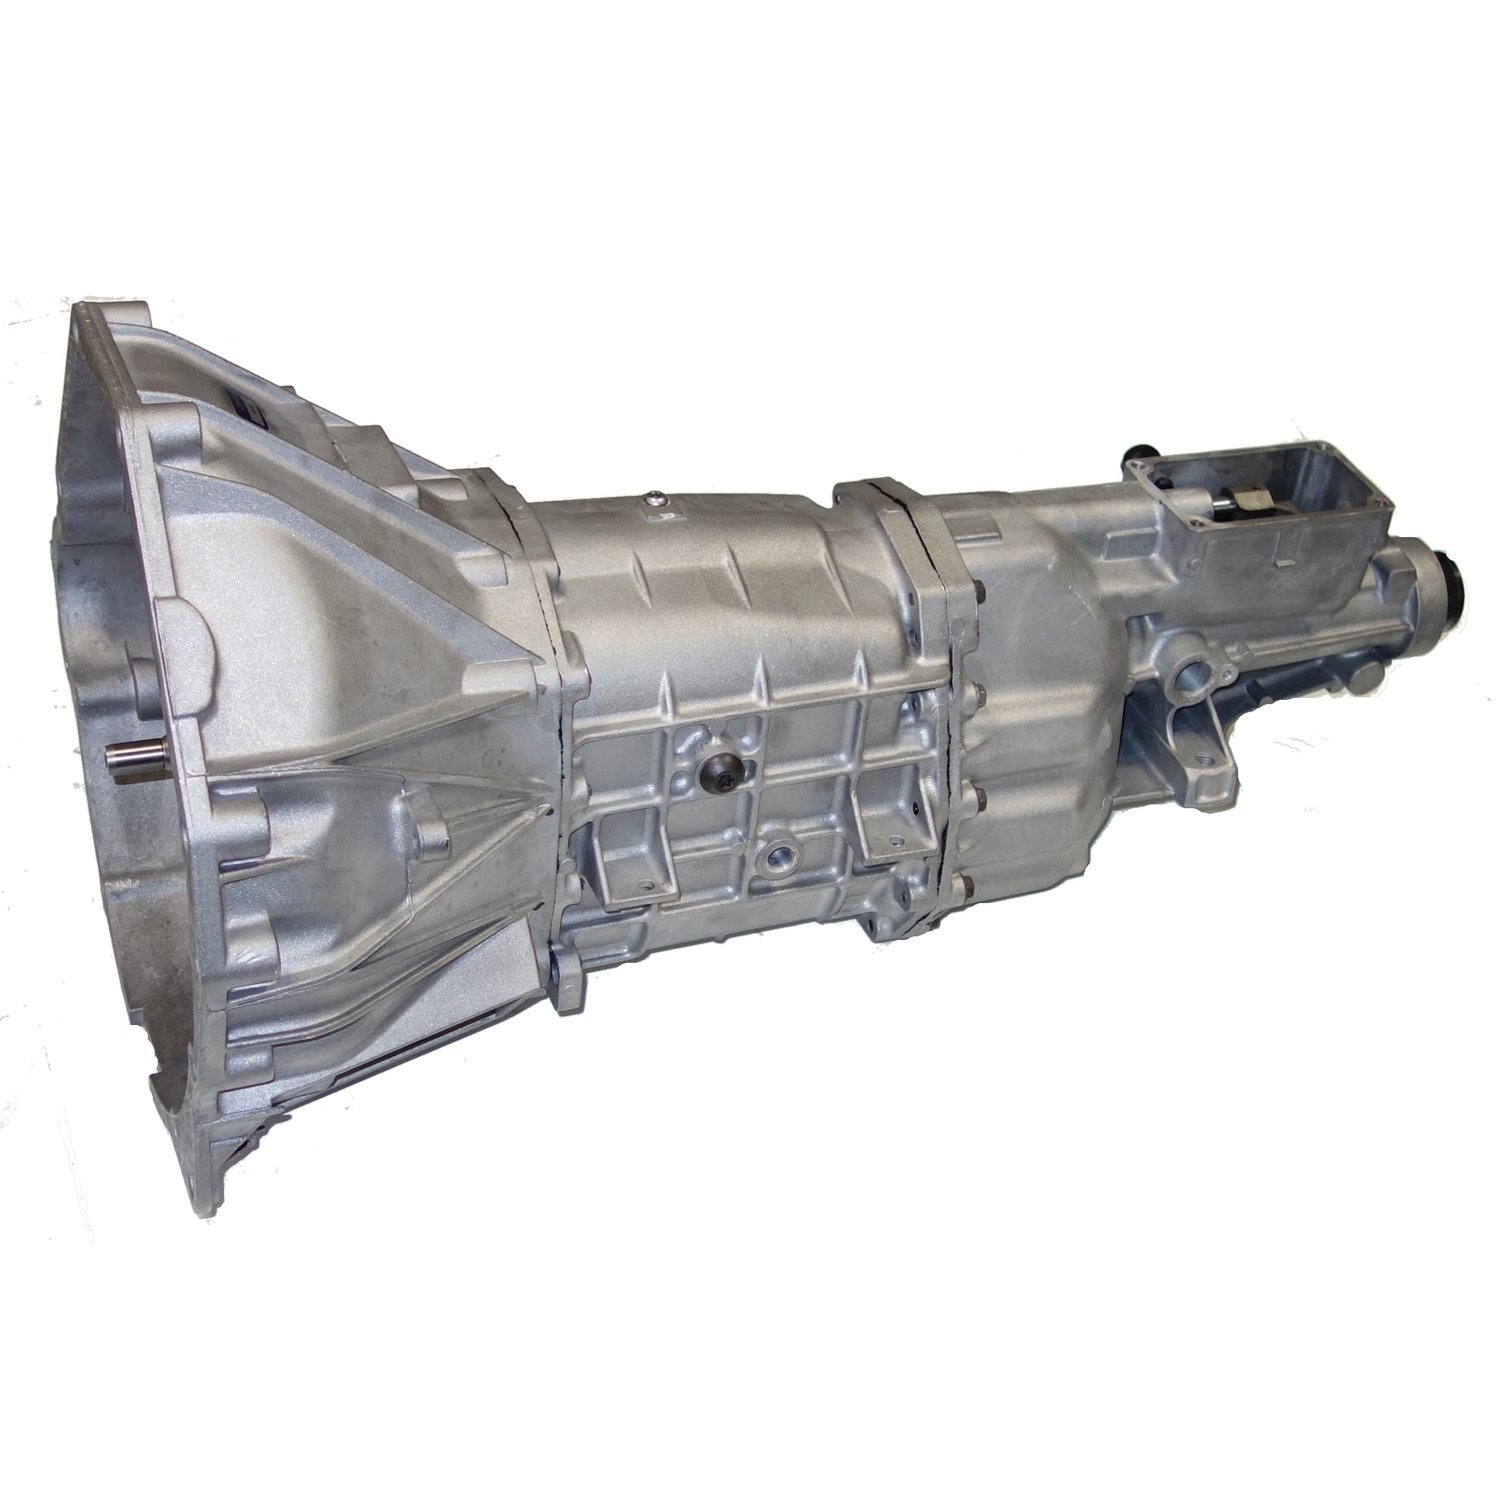 Remanufactured FM145 Manual Transmission for Ford 96-98 Mustang GT 4.6L, 5 Speed